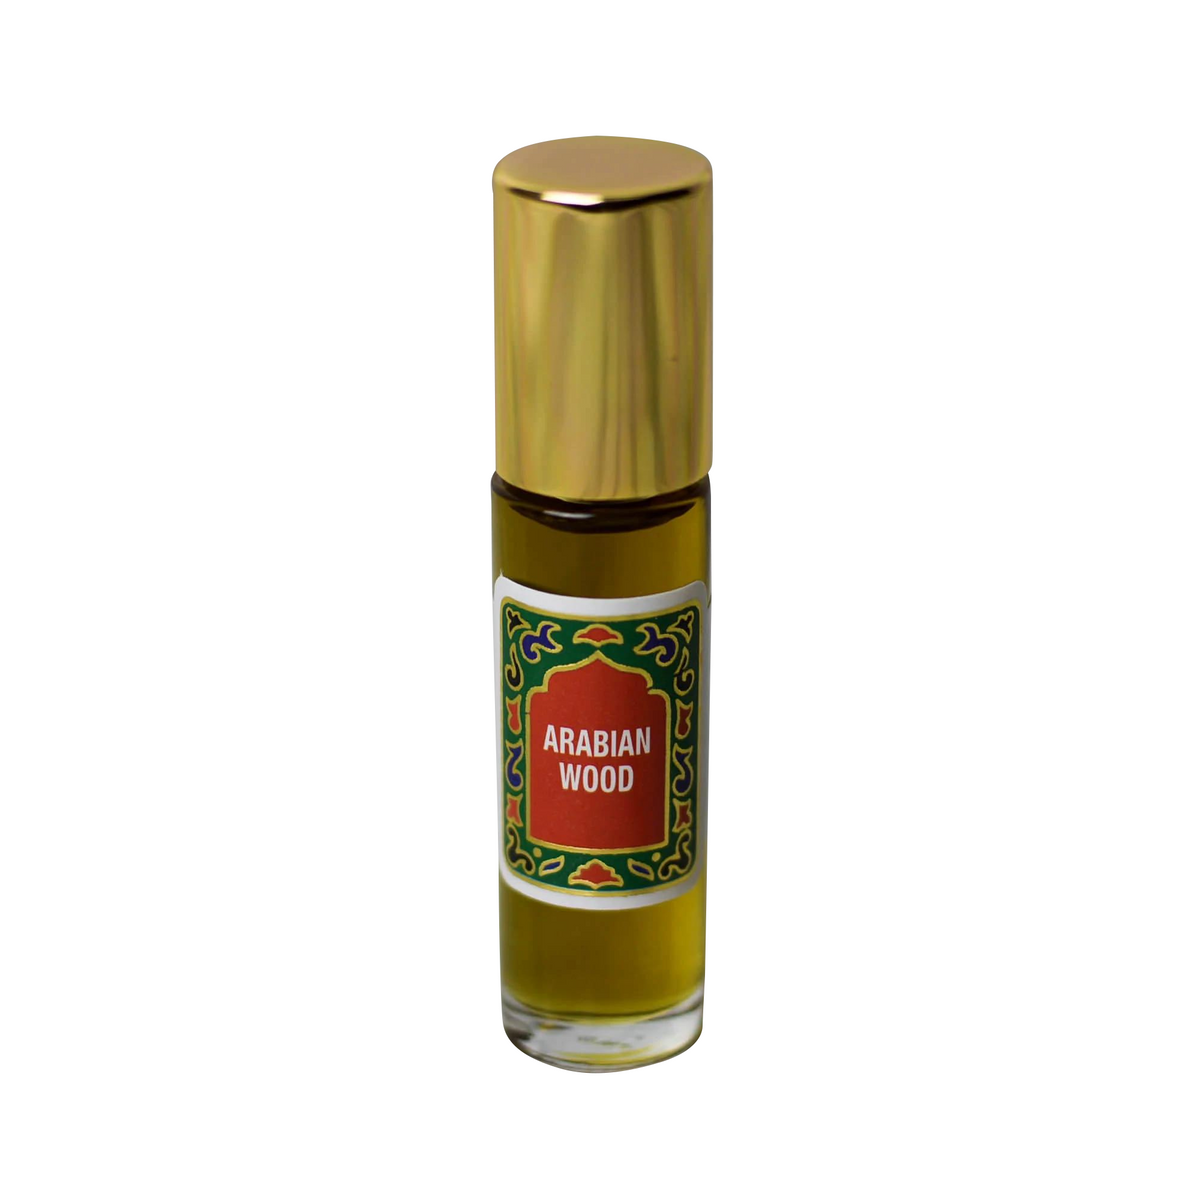 Primary image of Arabian Wood Fragrance Roll-On